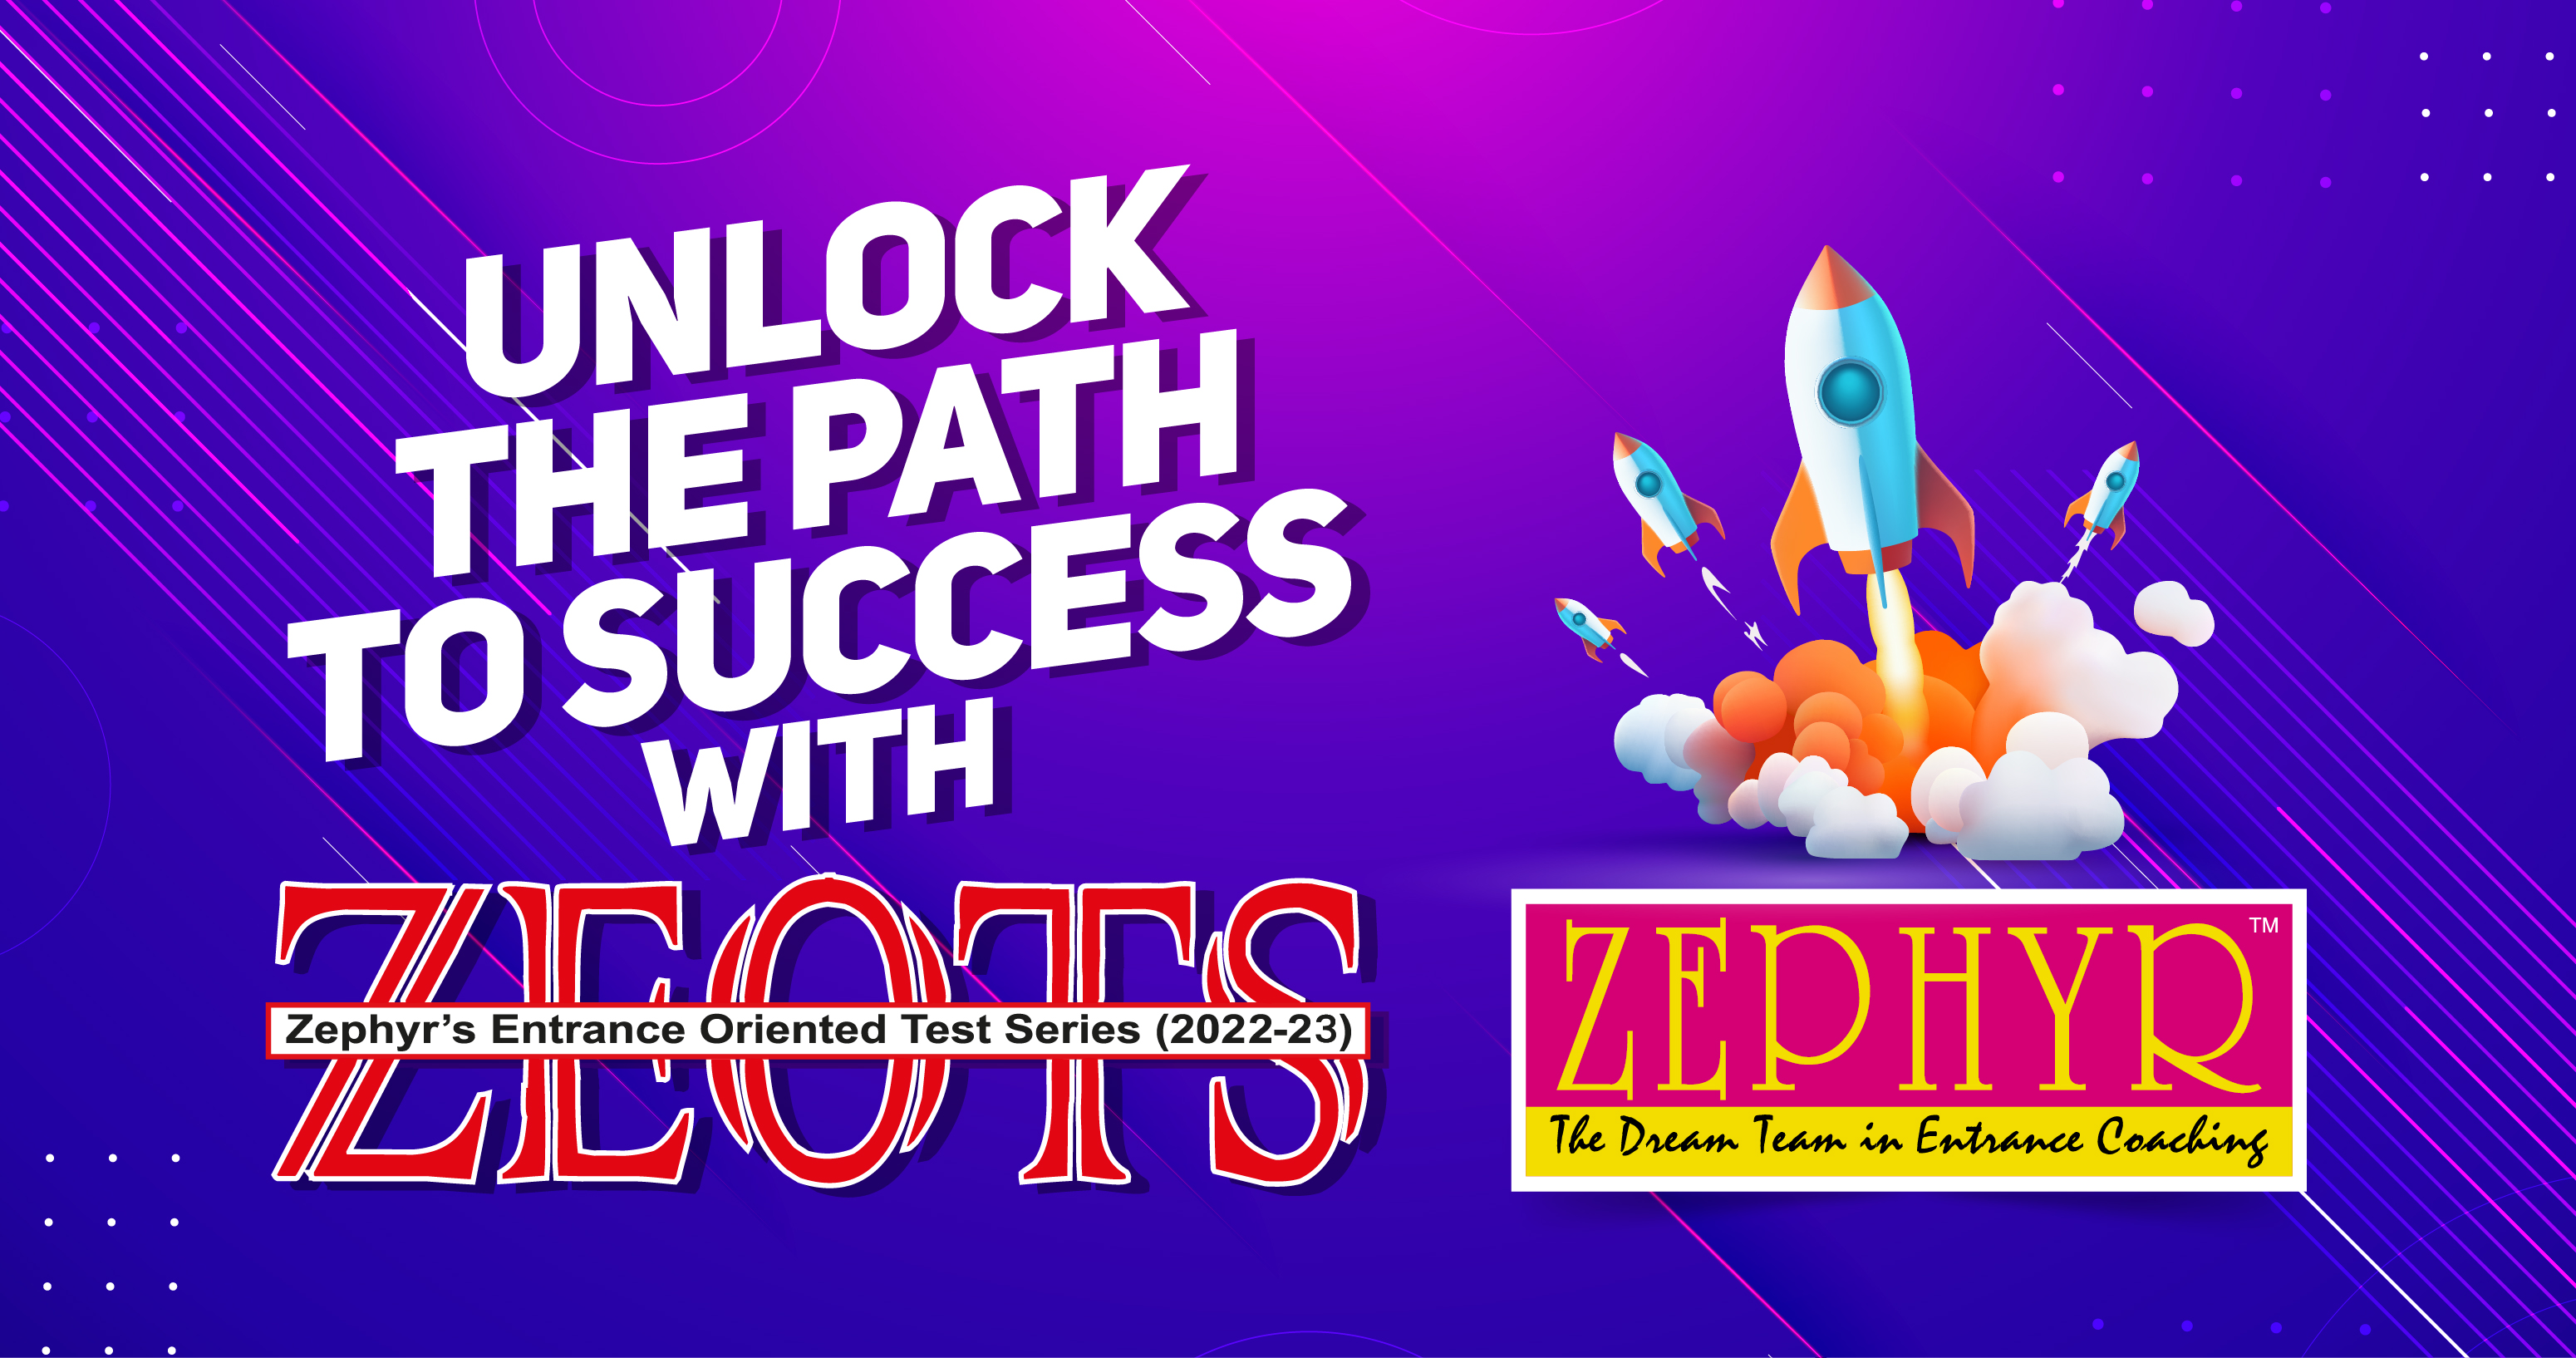 Unlock the path to success with ZEOTS